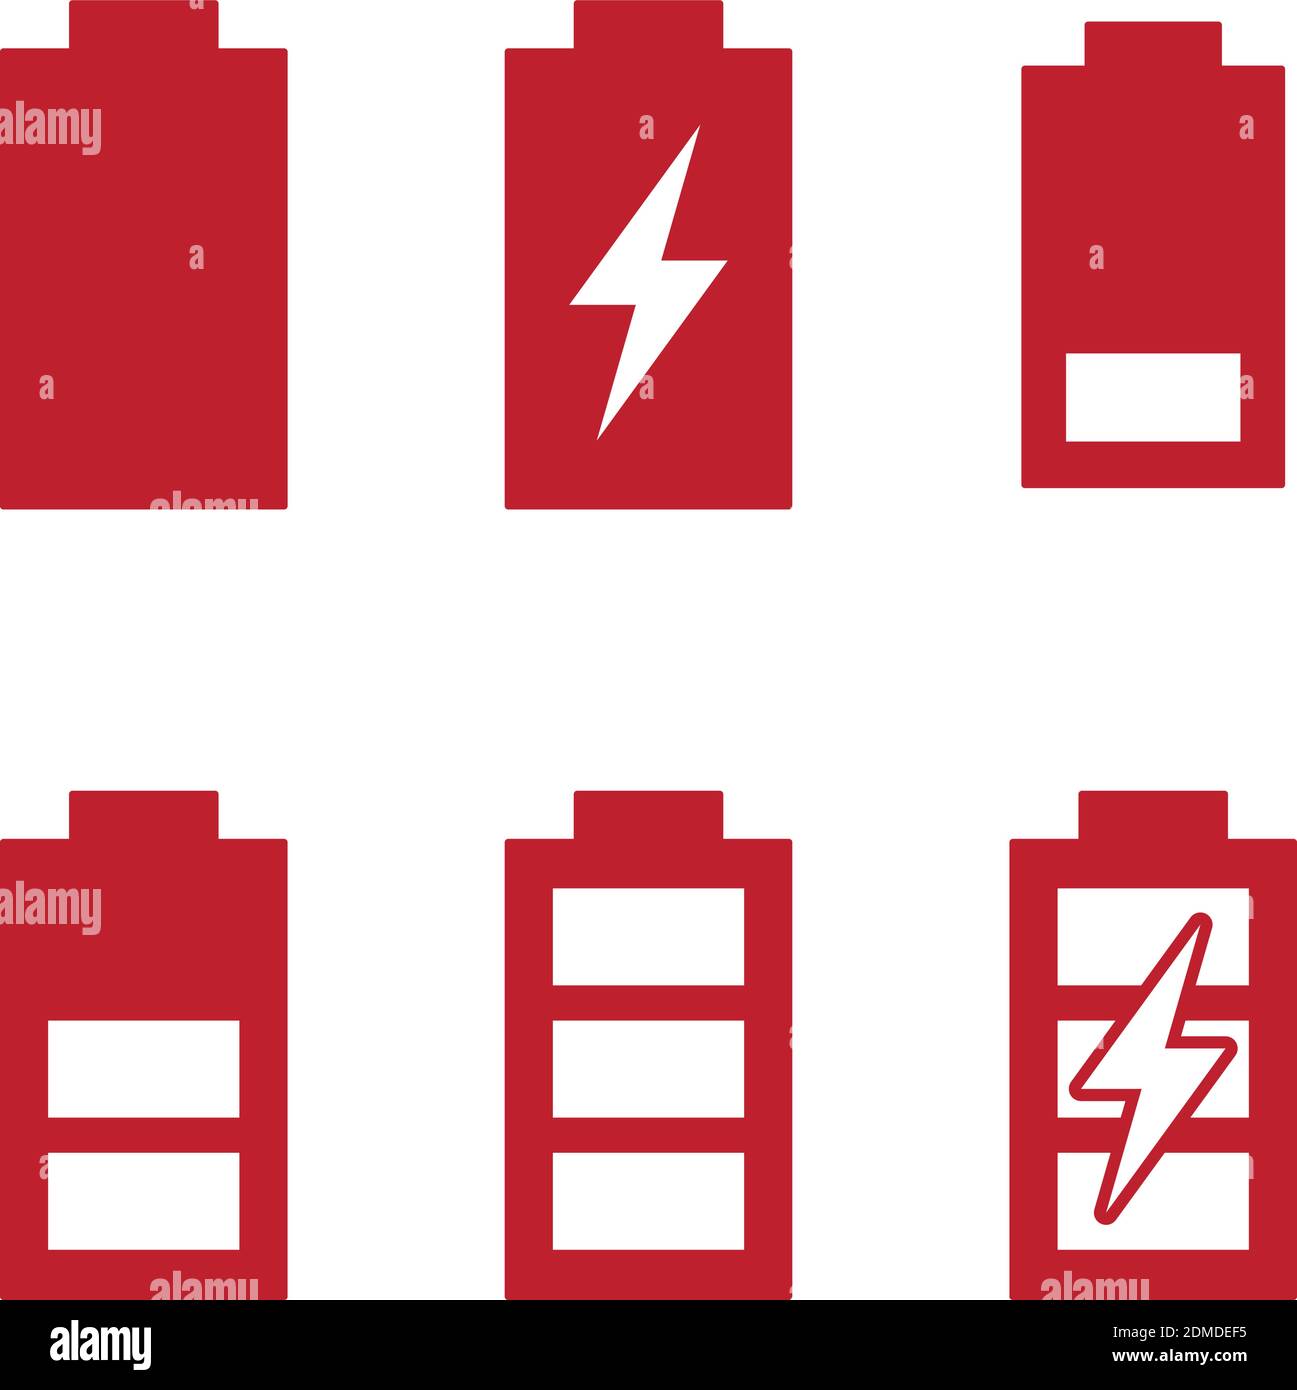 Charge and phases levels indicators battery charging icons set. Smartphone battery in different levels of charging. Vector illustration EPS.8 EPS.10 Stock Vector